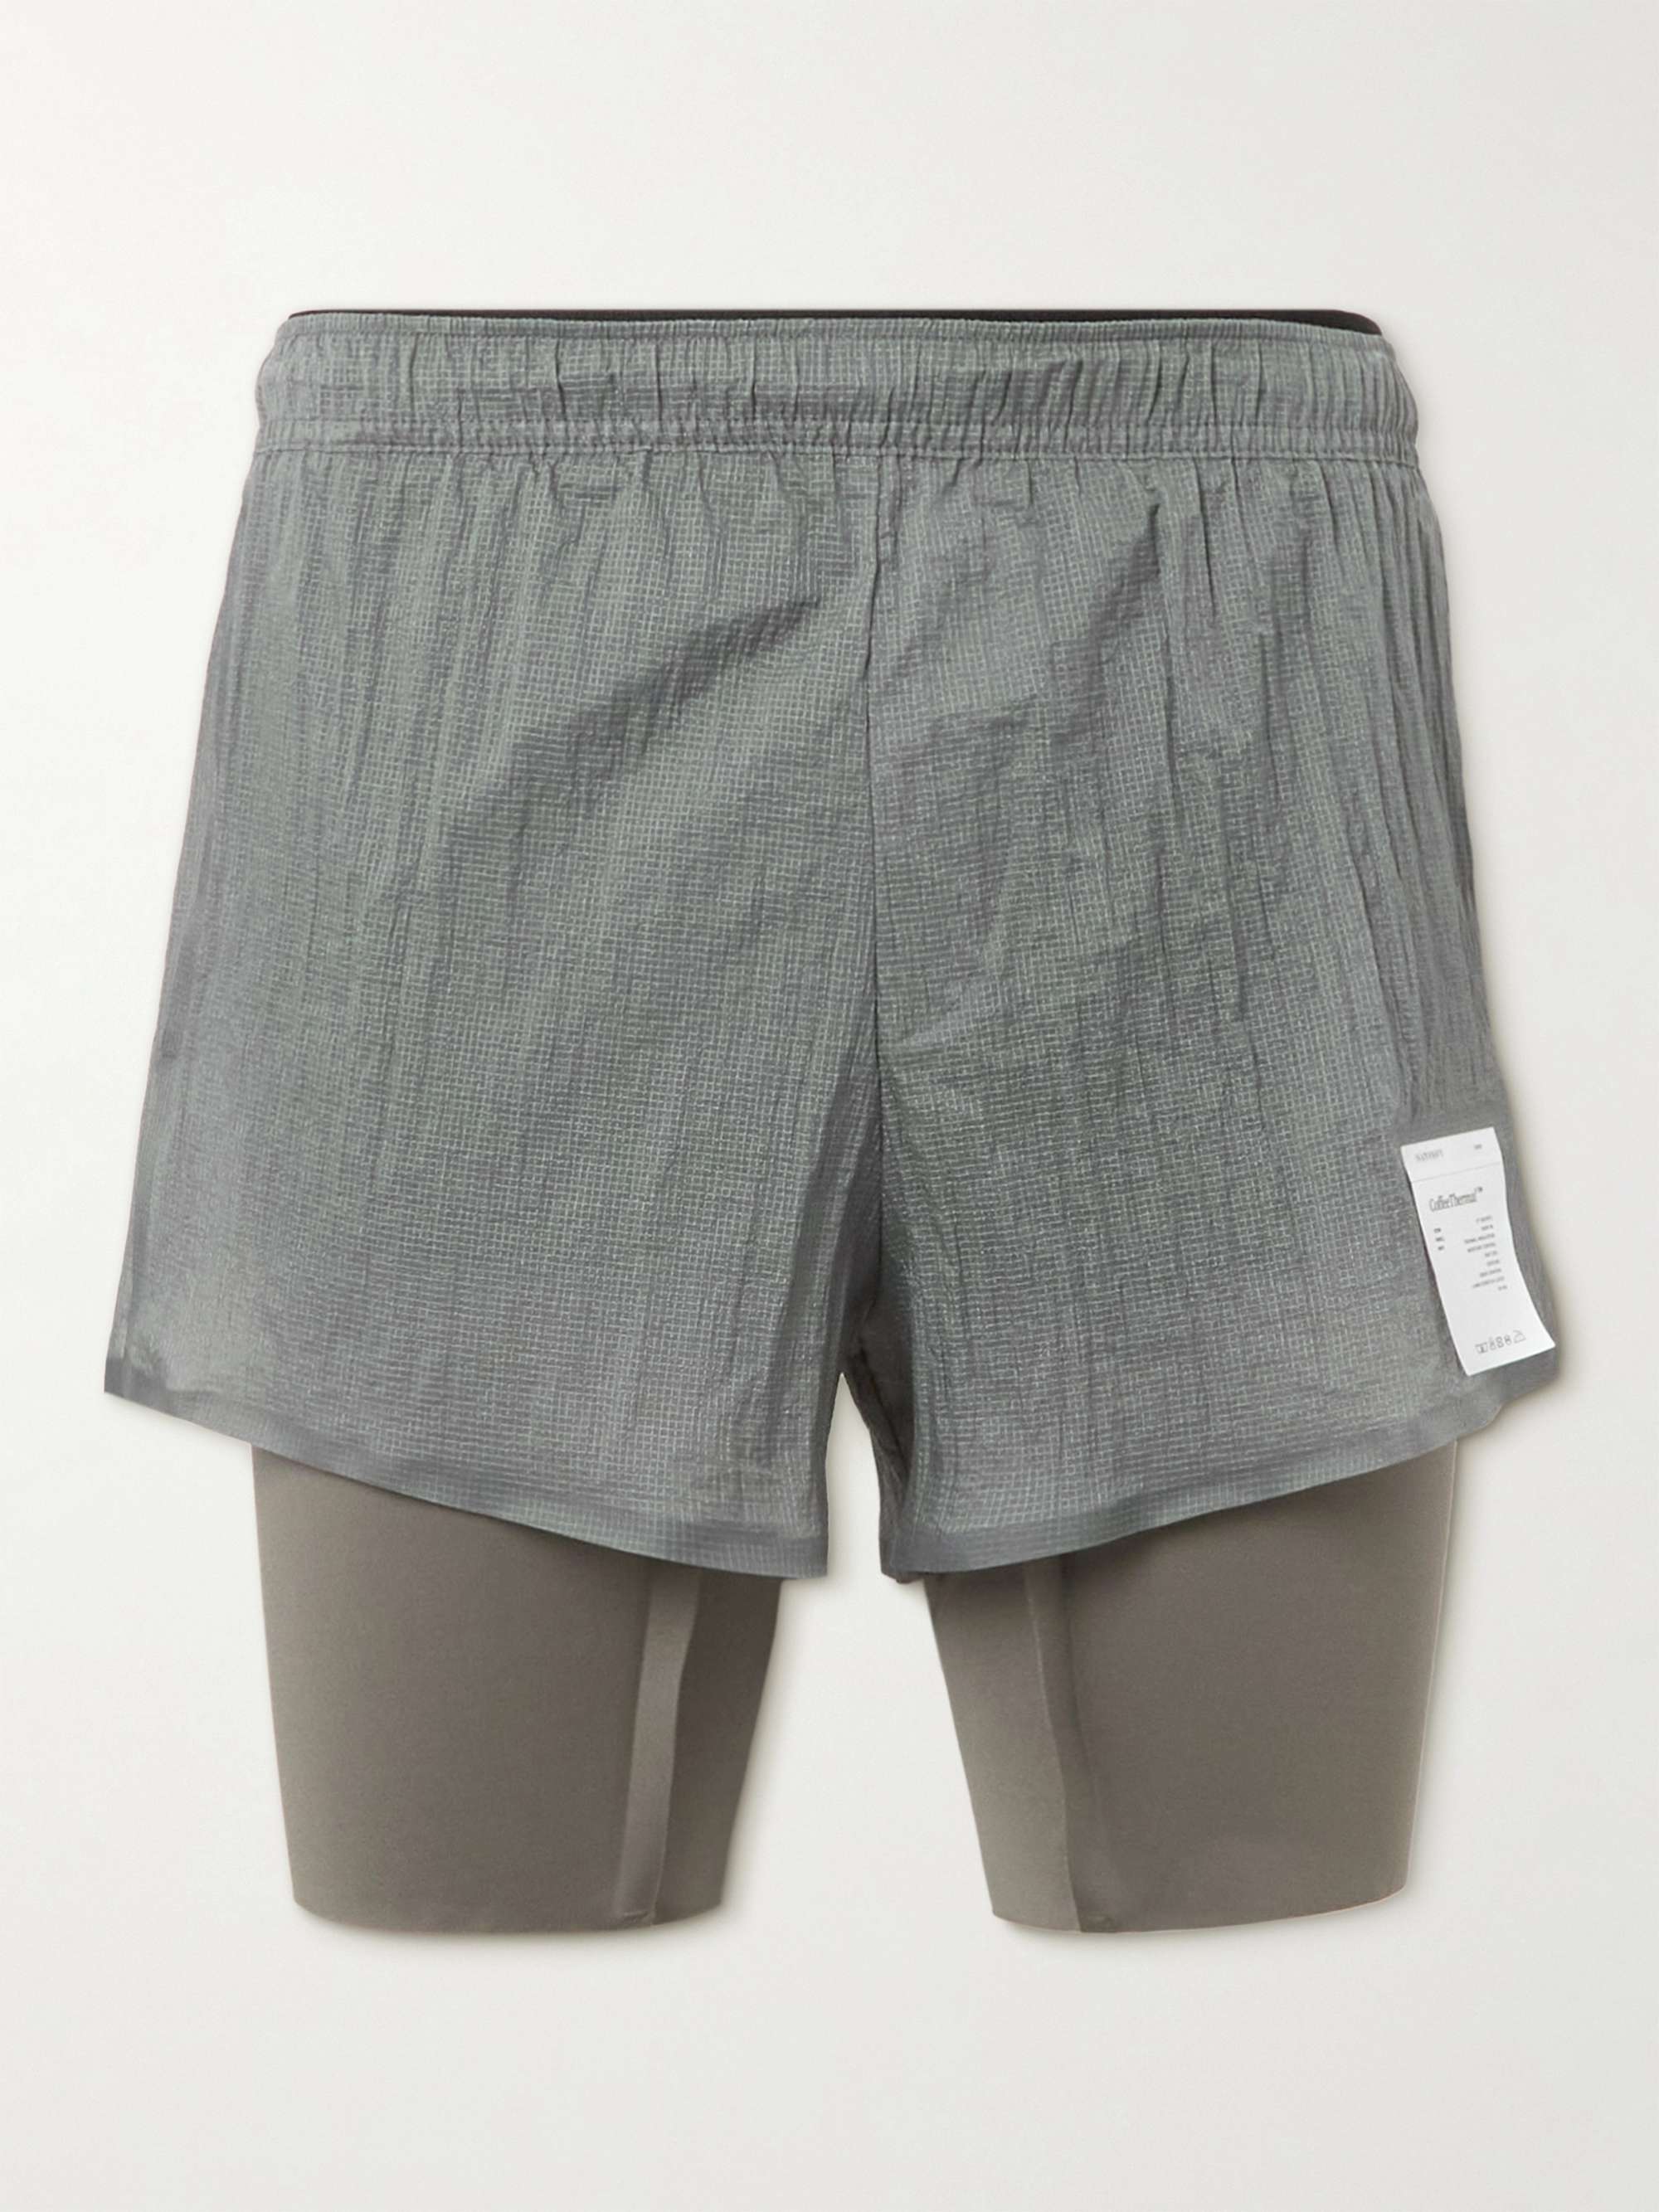 SATISFY Layered CoffeeThermal and Justice Shorts